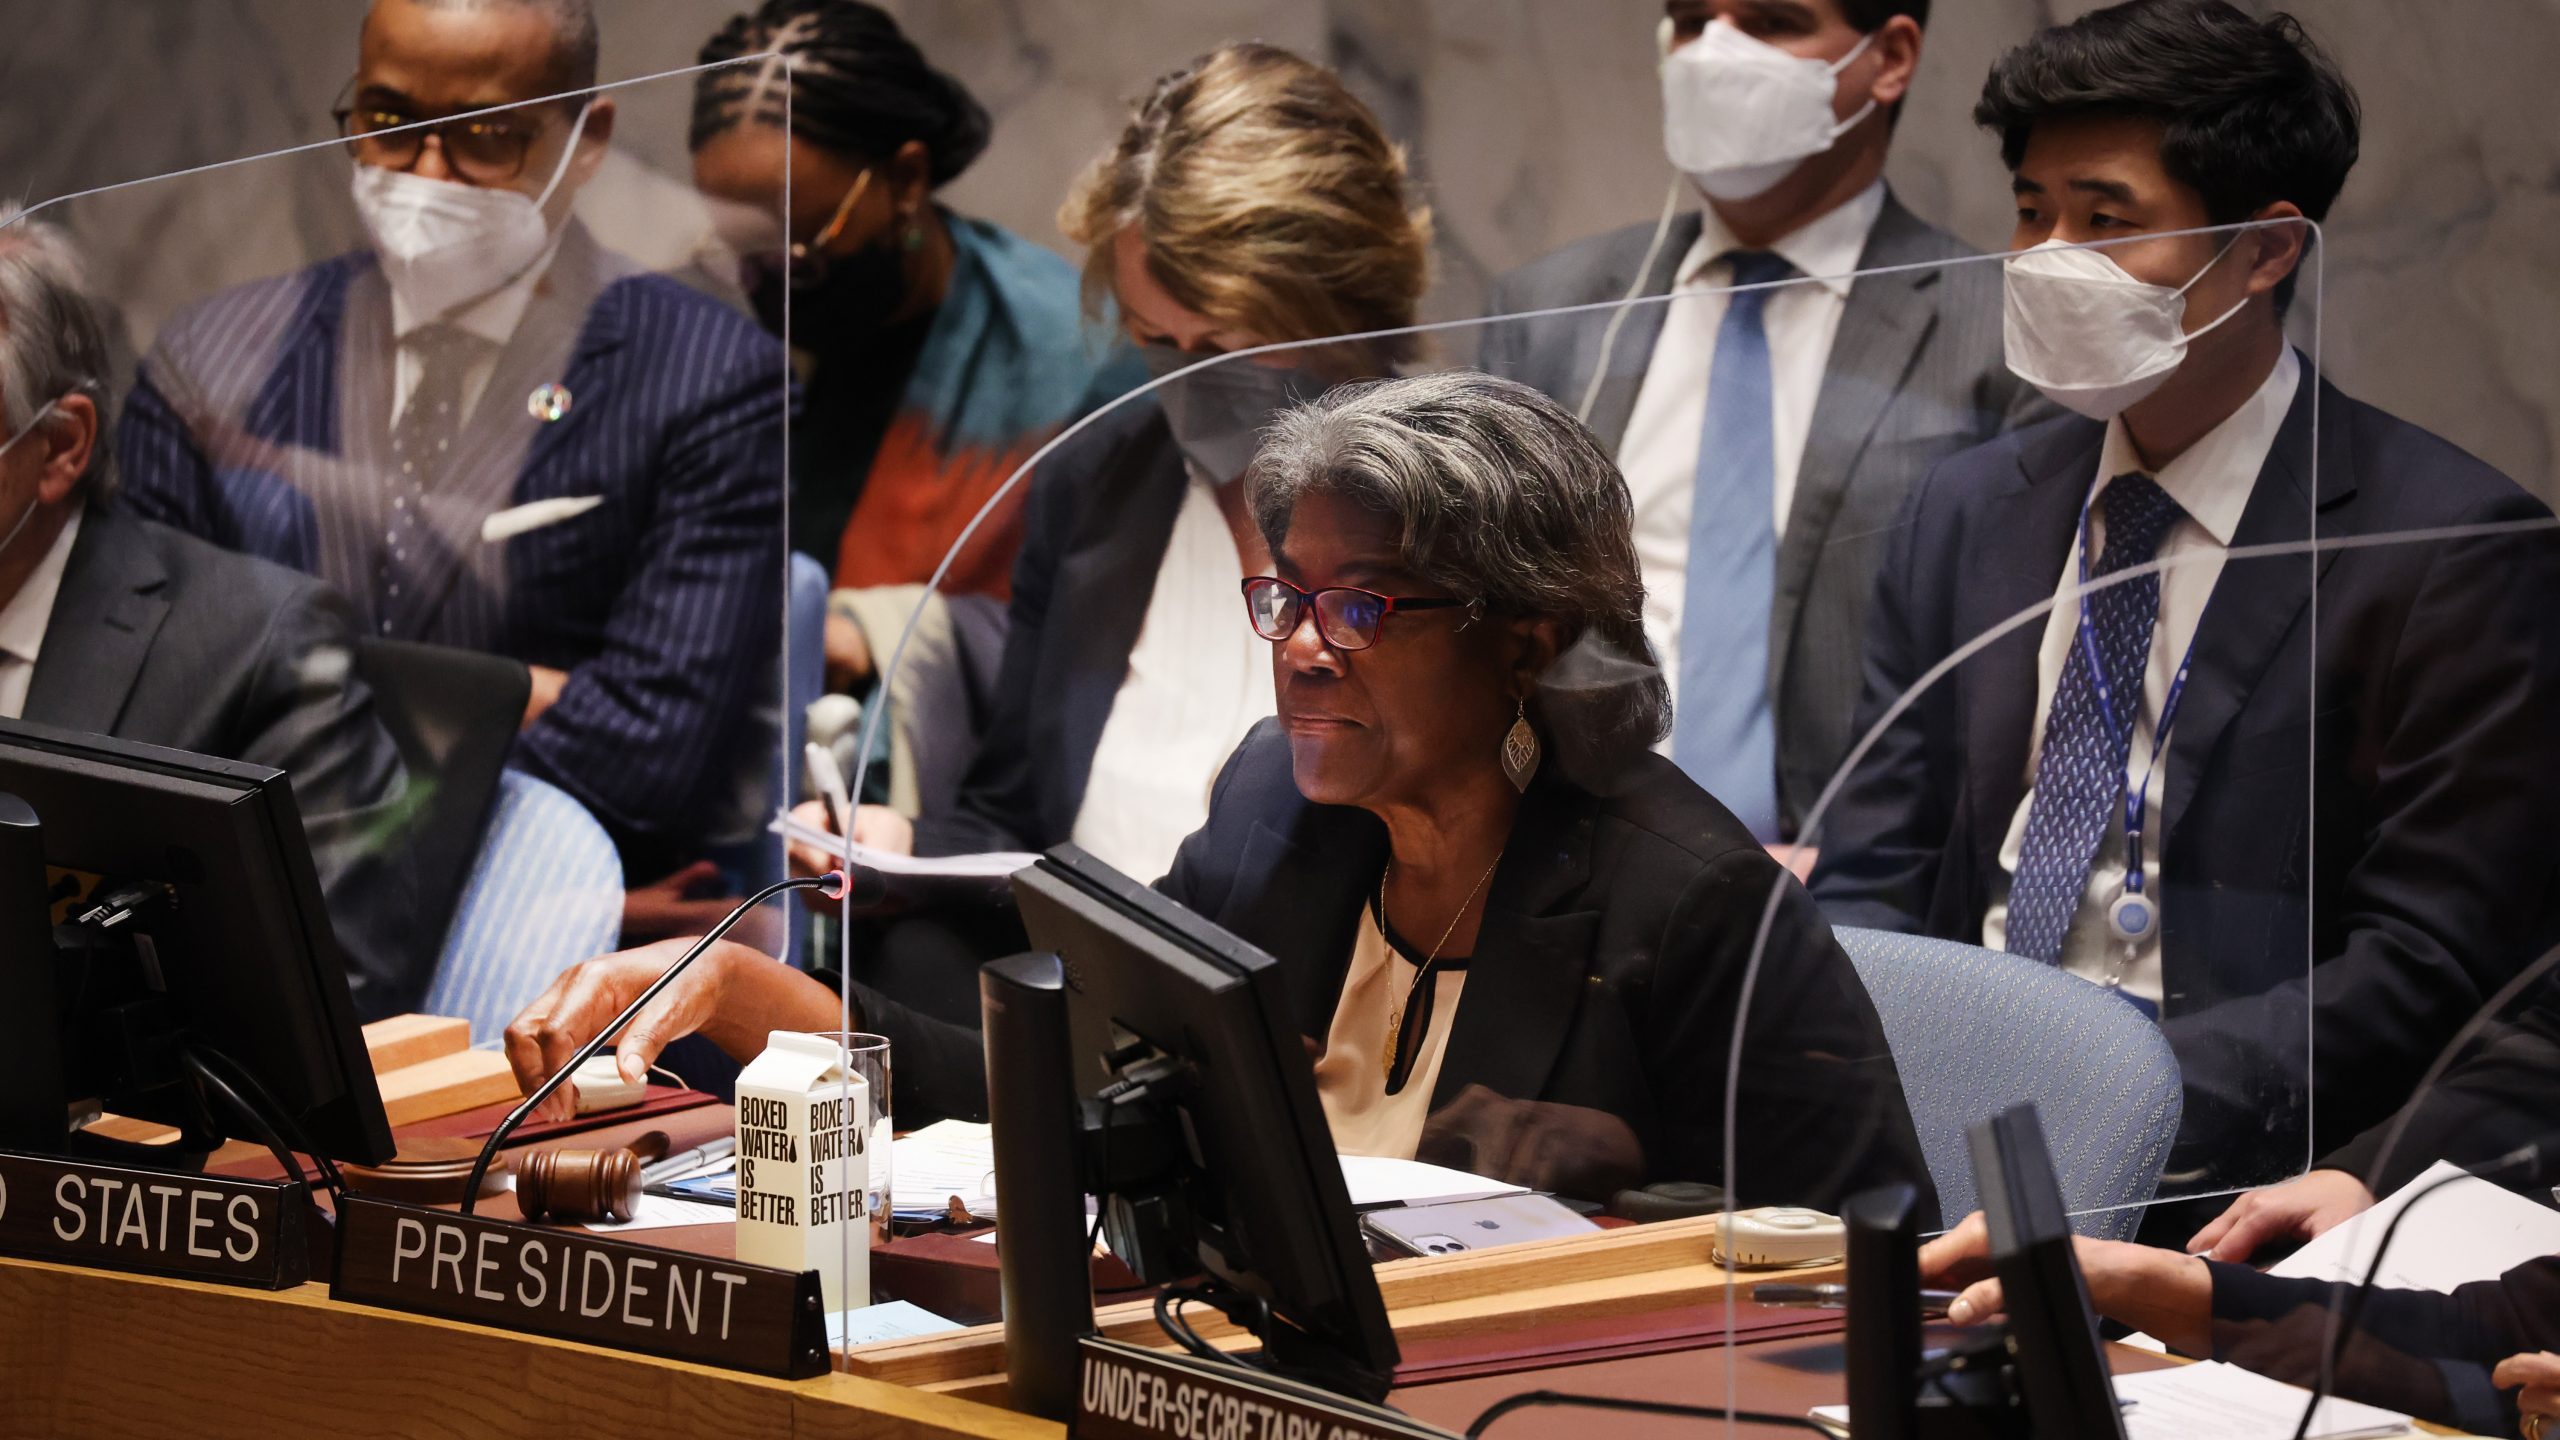 Remarks by Ambassador Linda Thomas-Greenfield at a UN Security Council Briefing on the Political and Humanitarian Situations in Syria